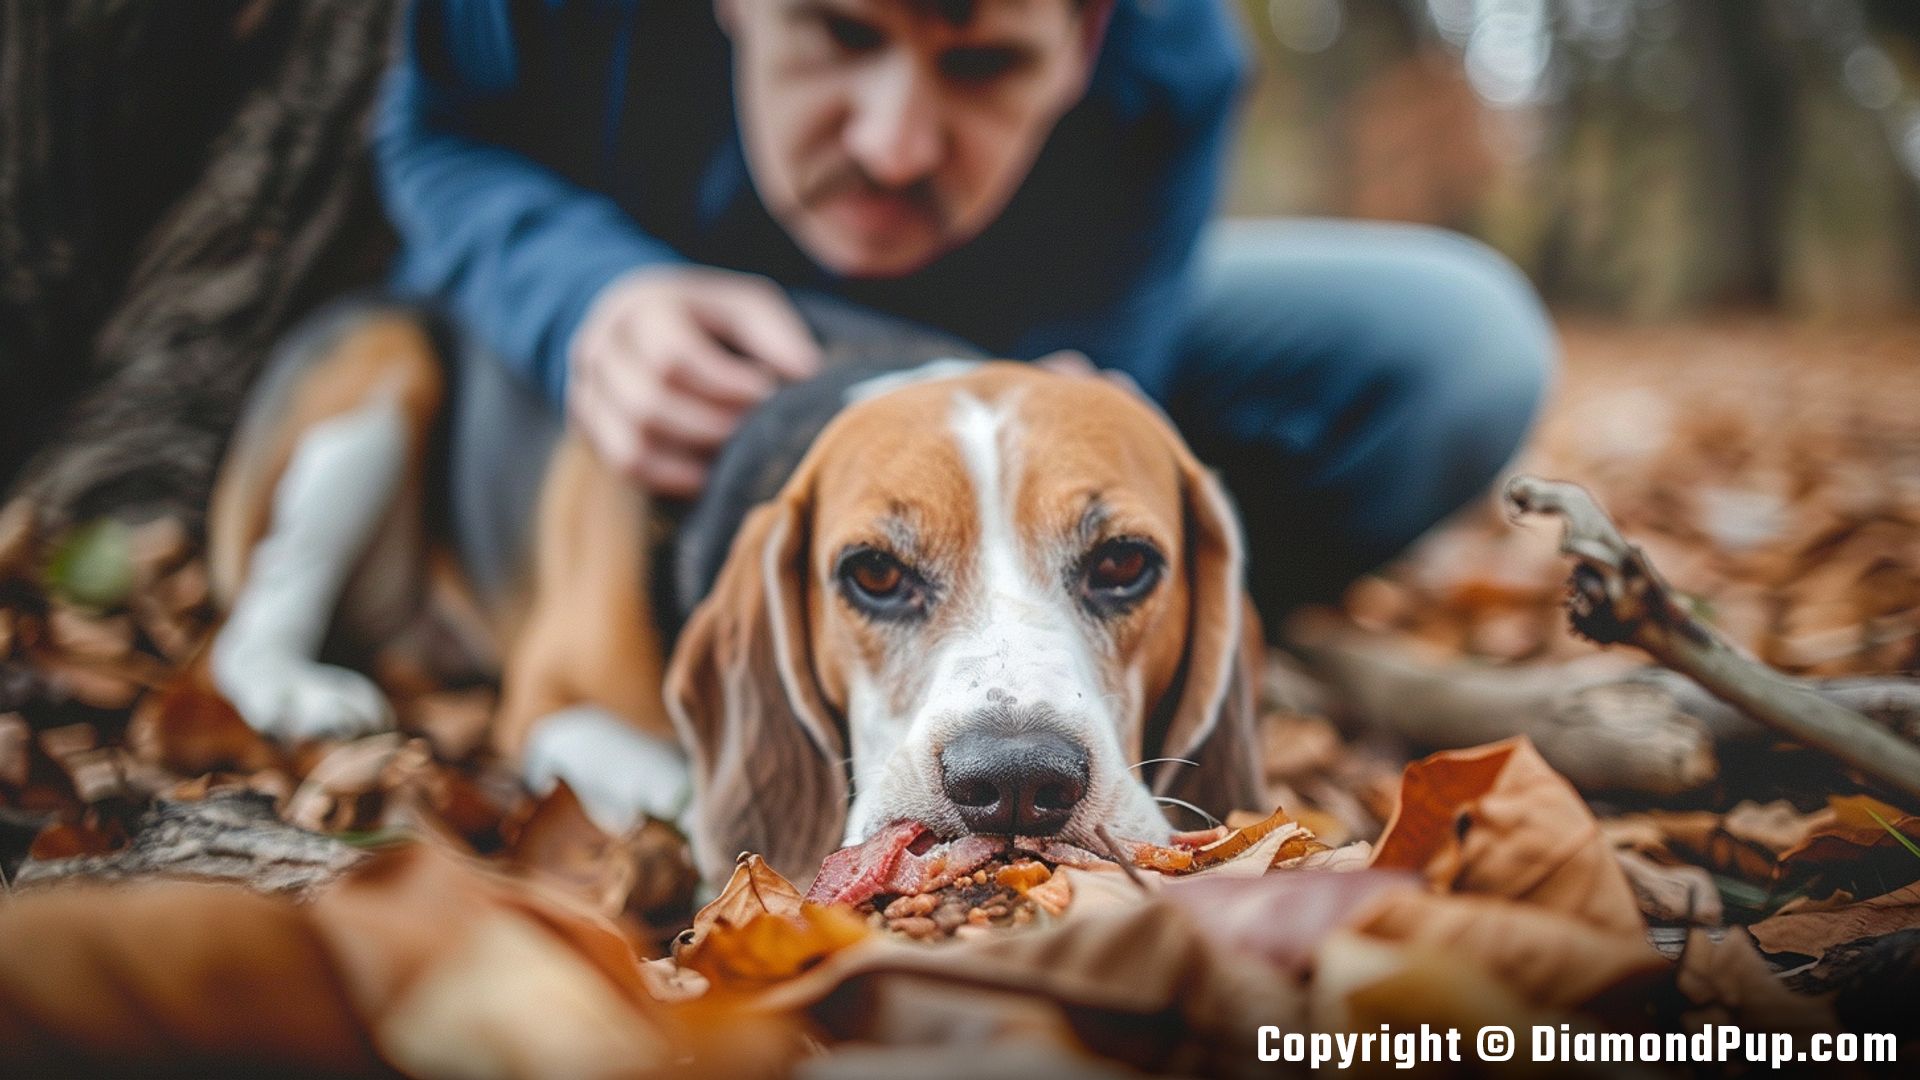 Photograph of a Playful Beagle Snacking on Bacon